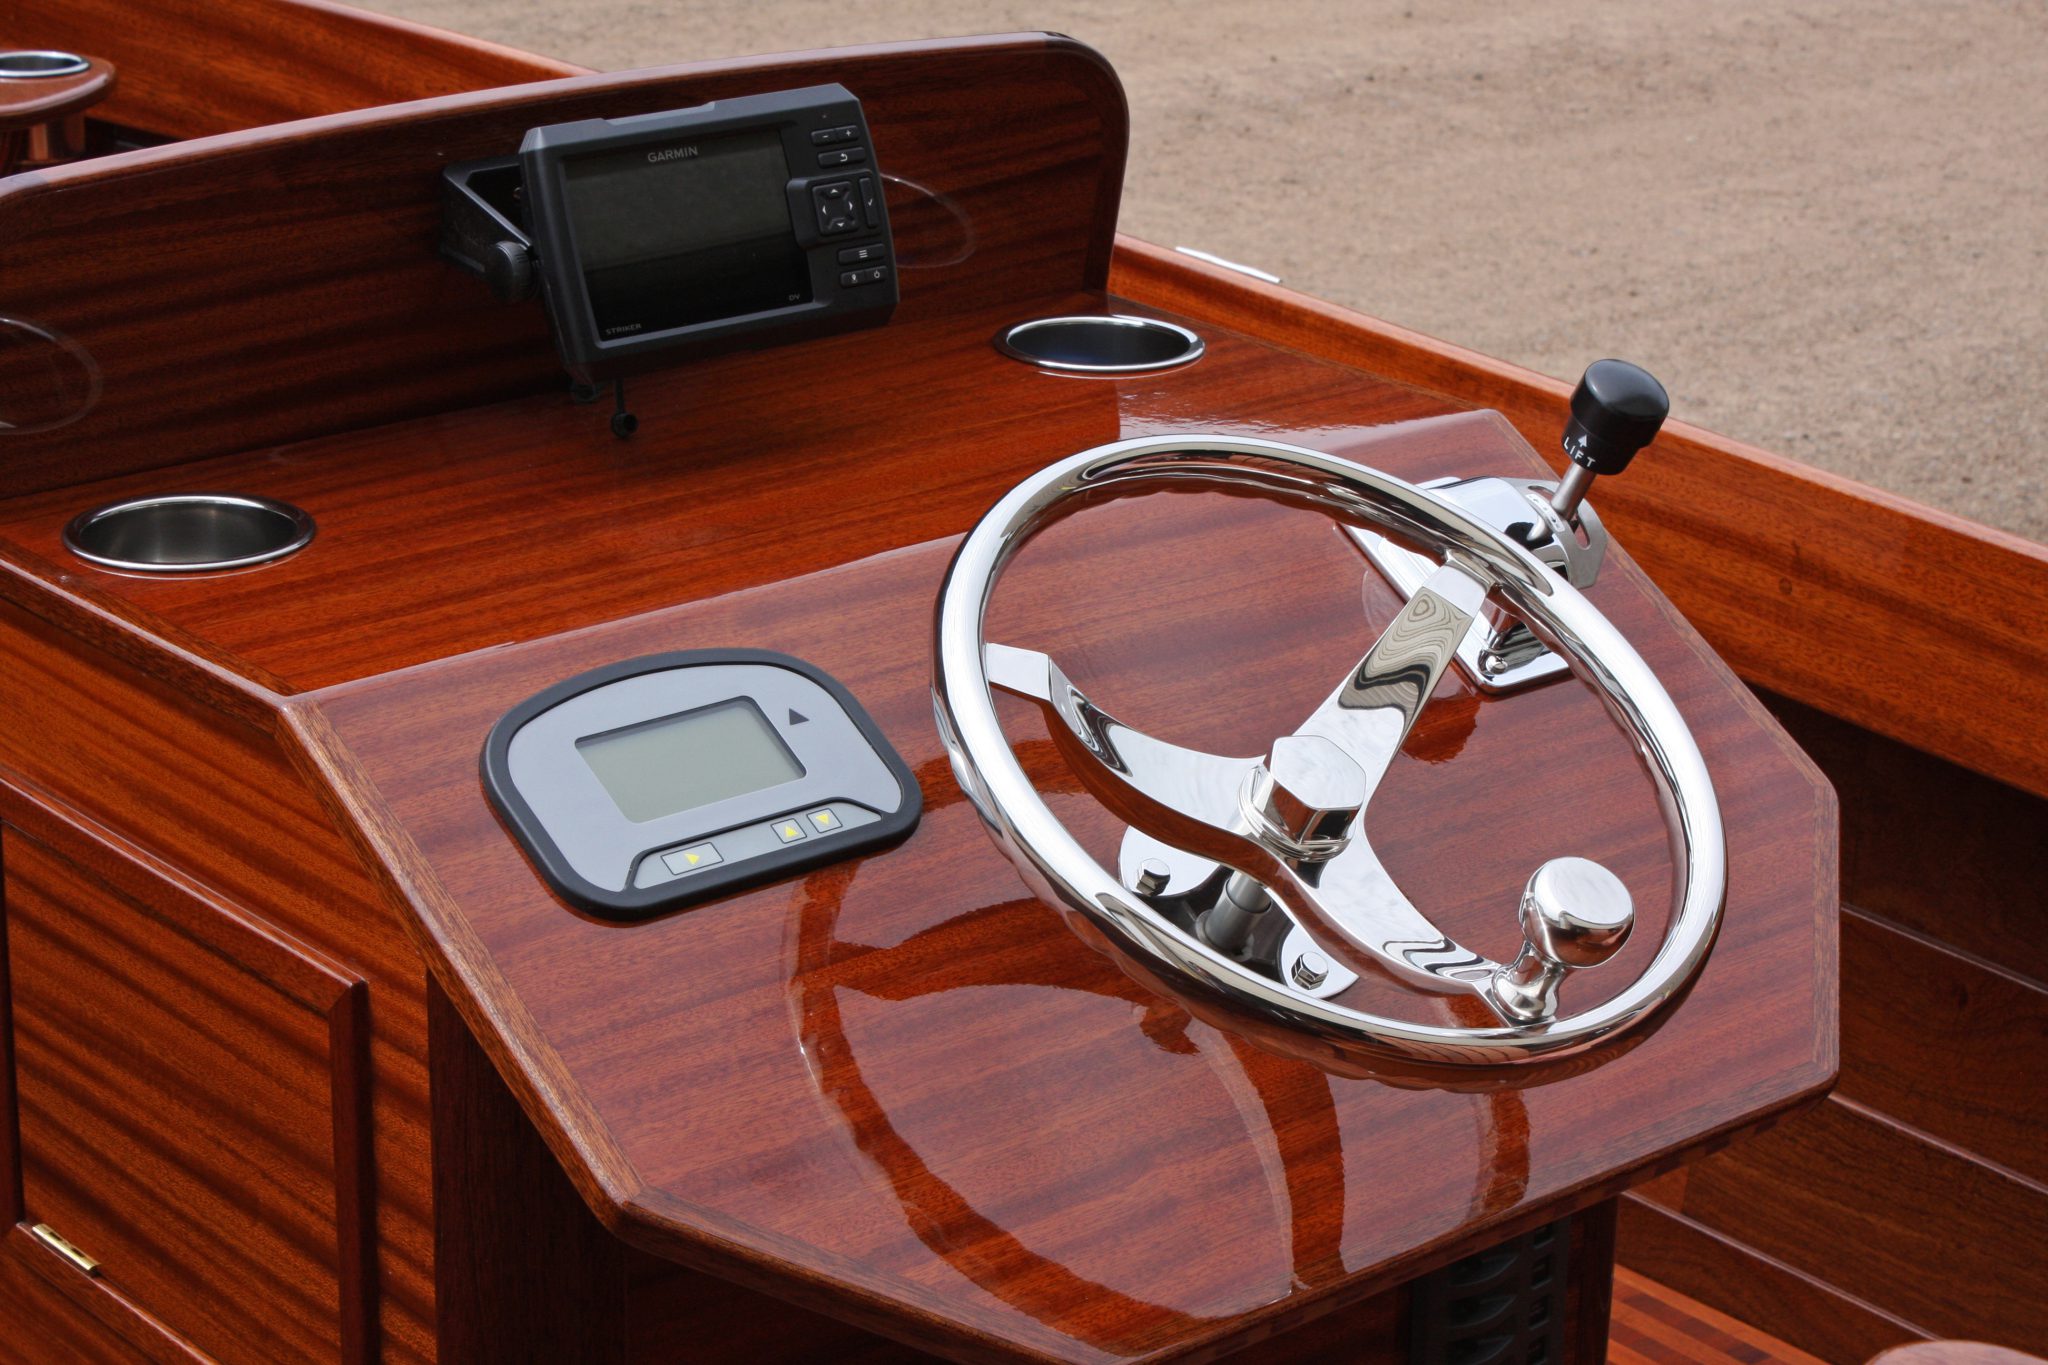 Mahogany console with stainless steering wheel